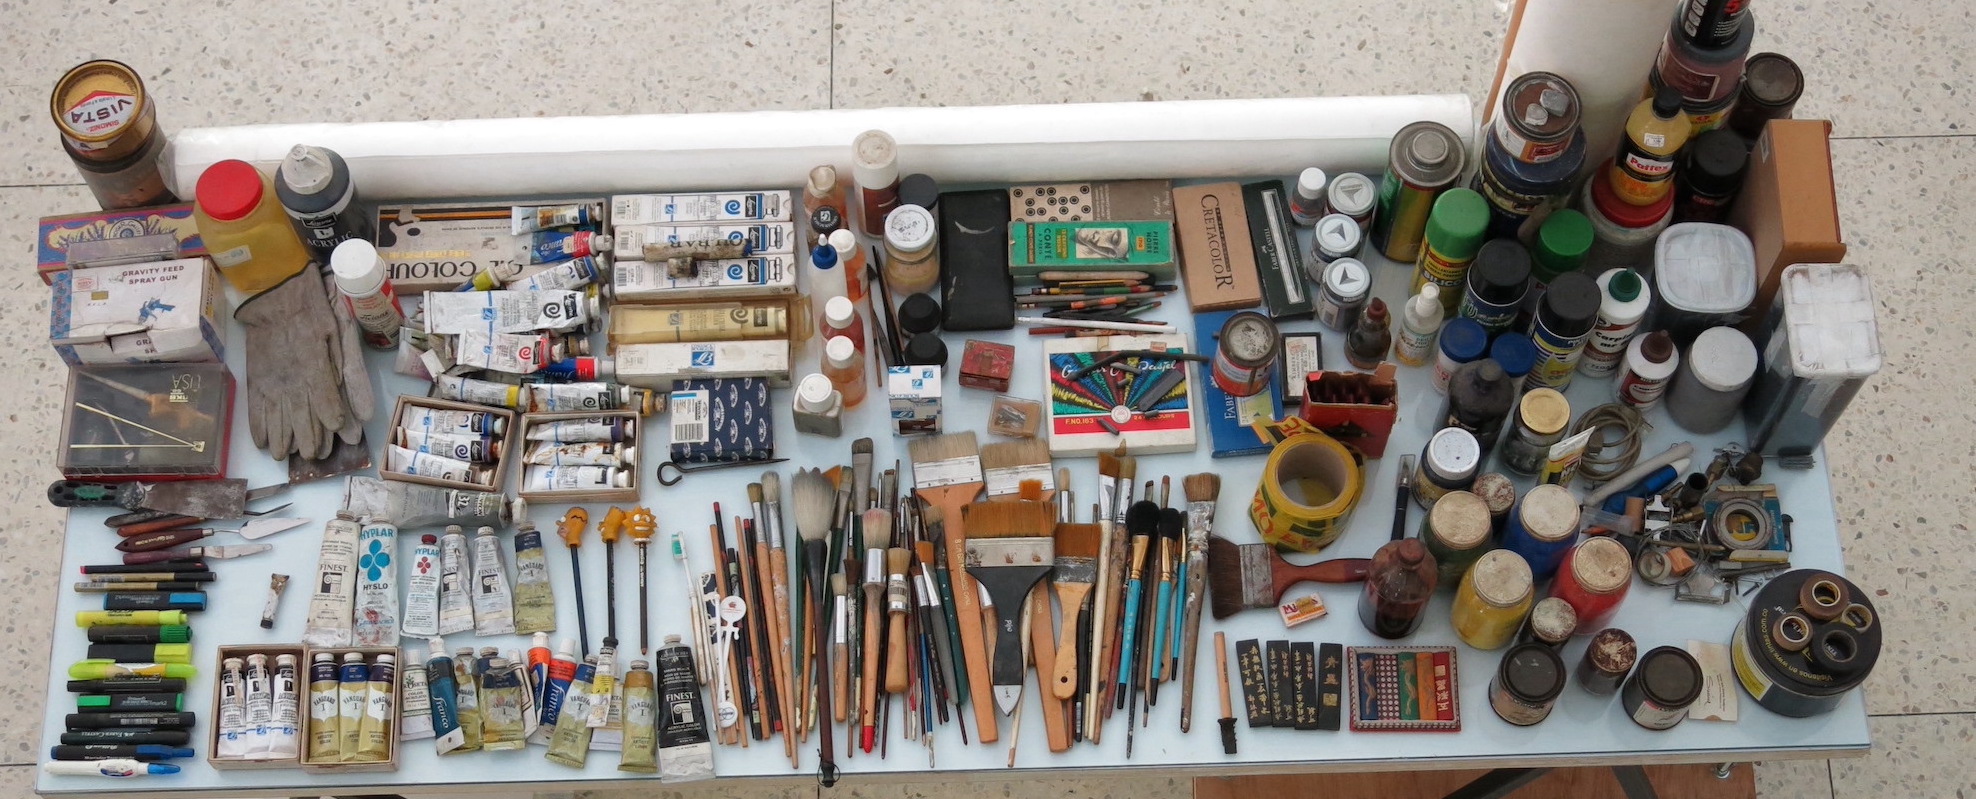 A table covered with various art supplies and tools including paintbrushes and paints.